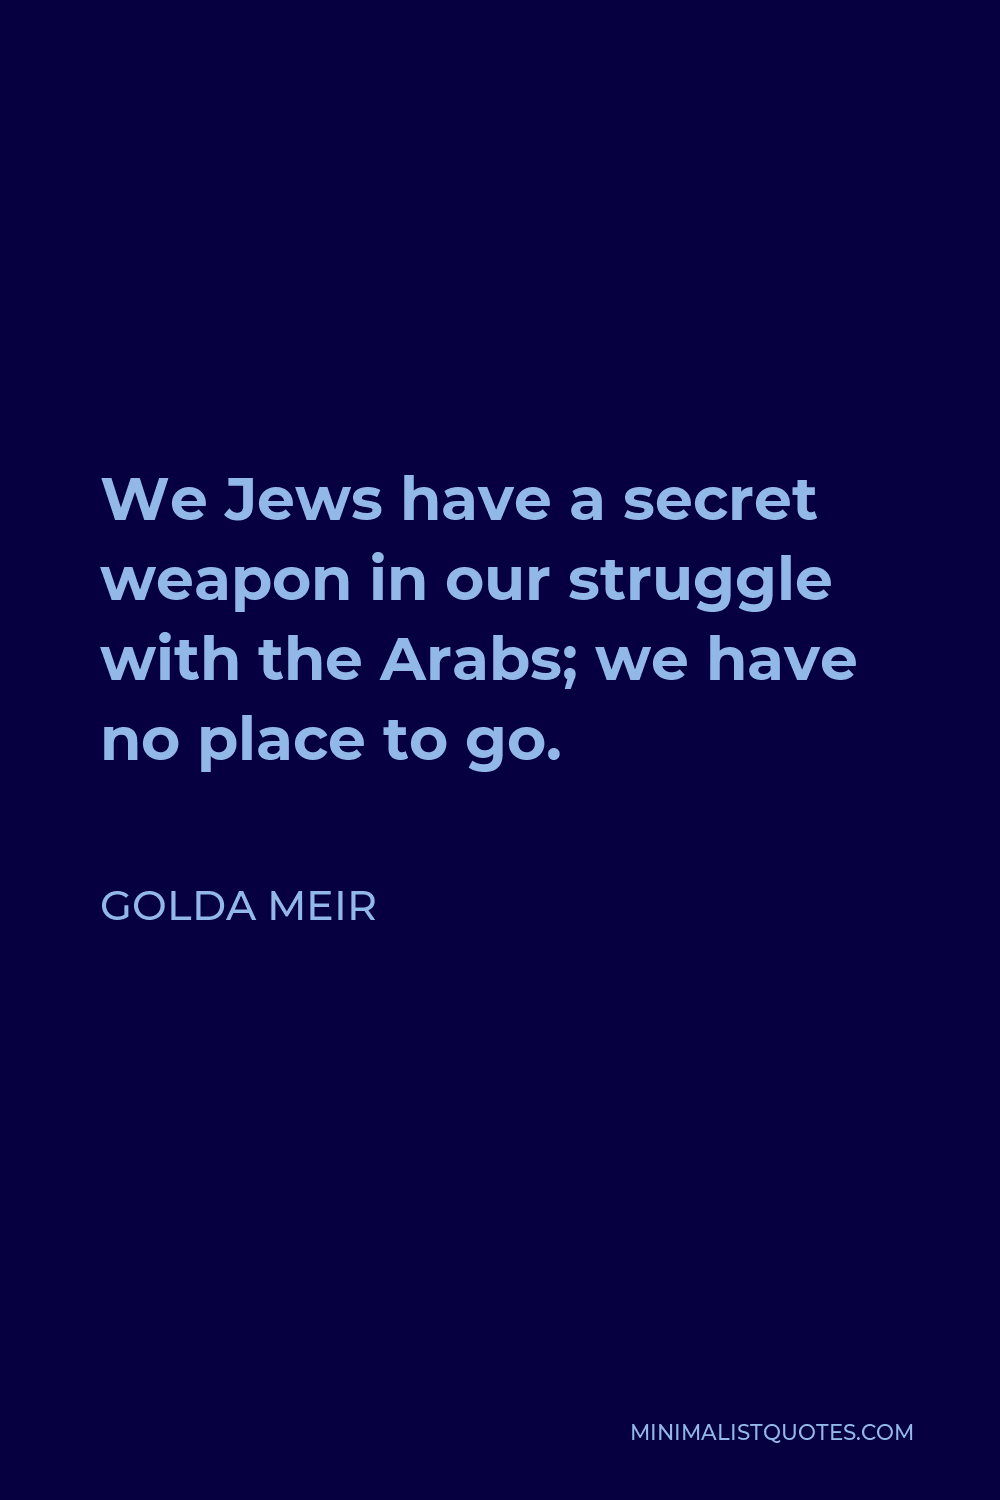 Golda Meir Quote - We Jews have a secret weapon in our struggle with the Arabs; we have no place to go.